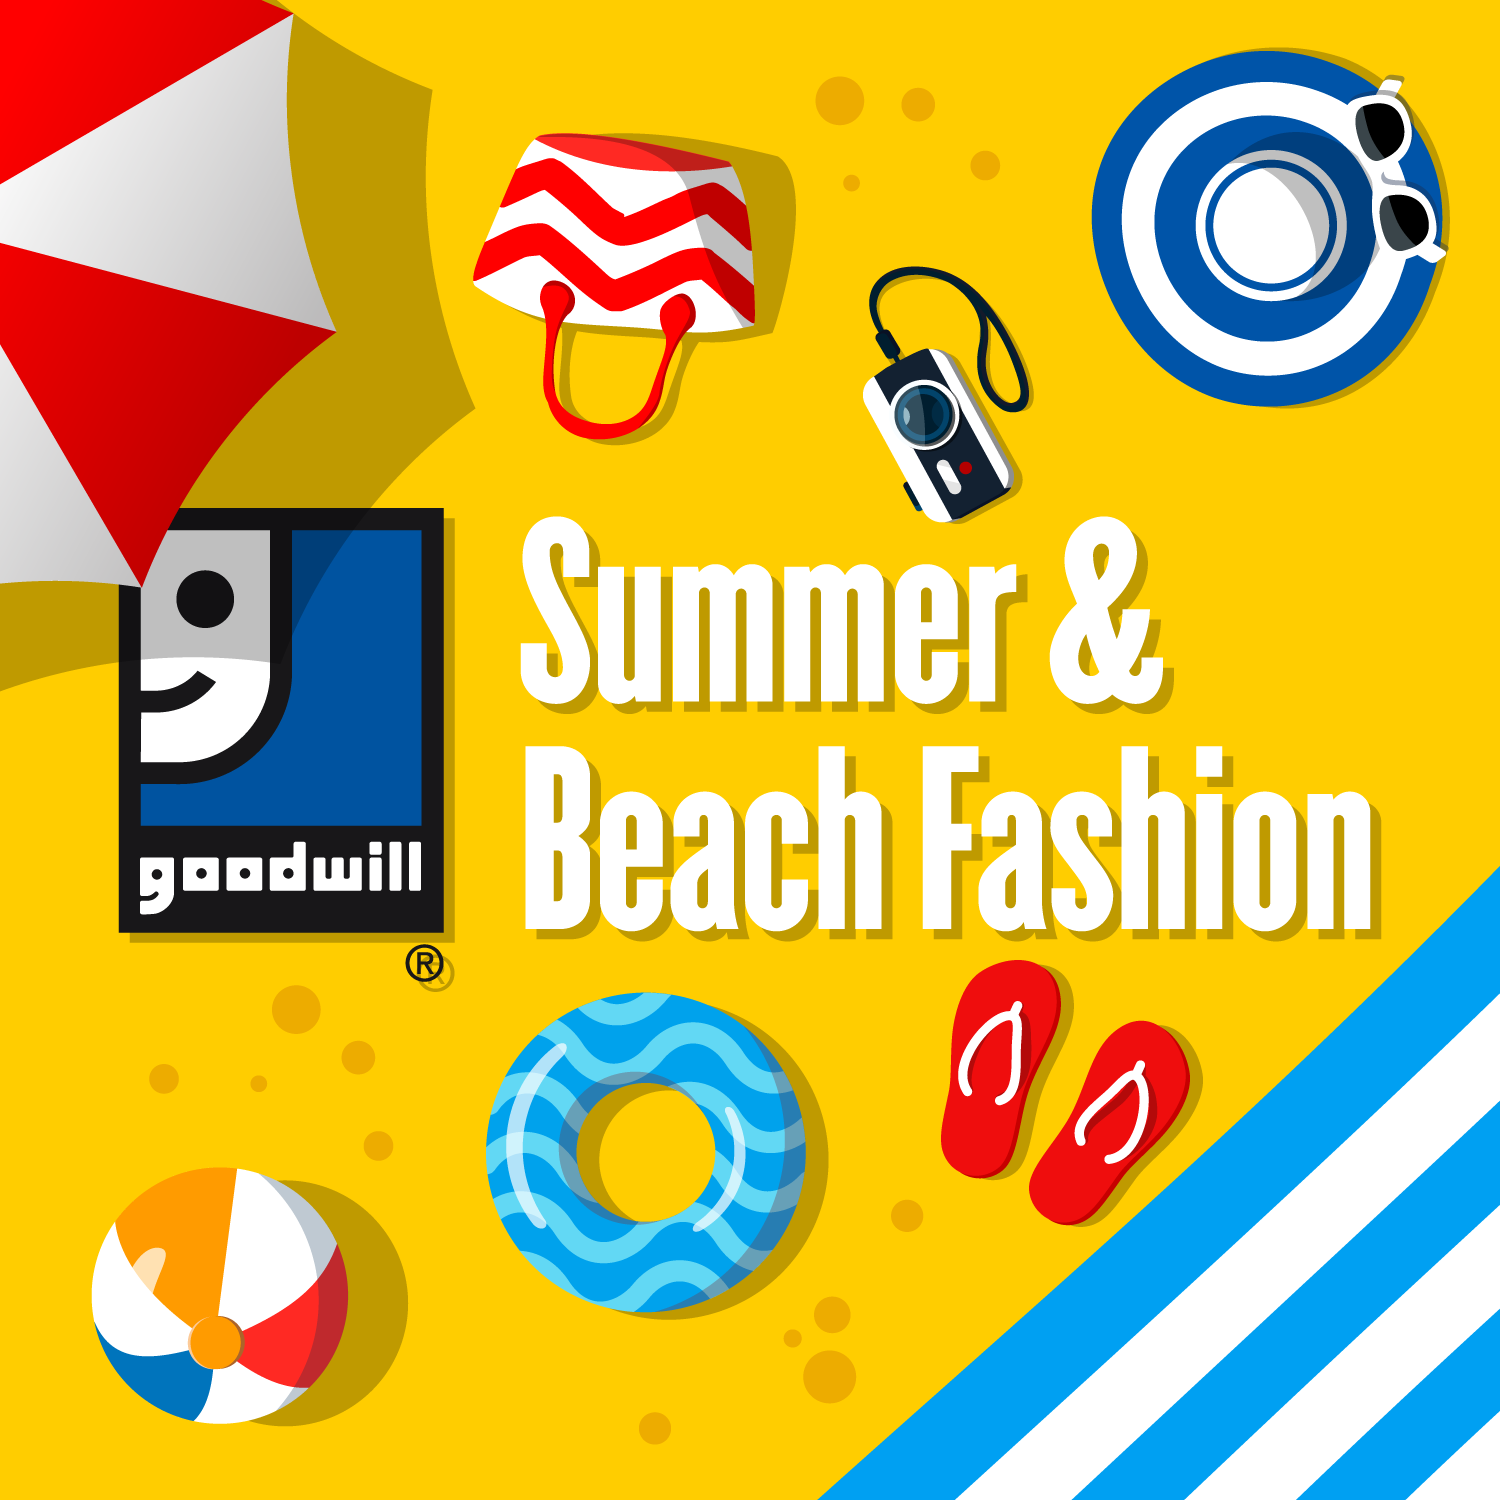 Goodwill social graphic (1)